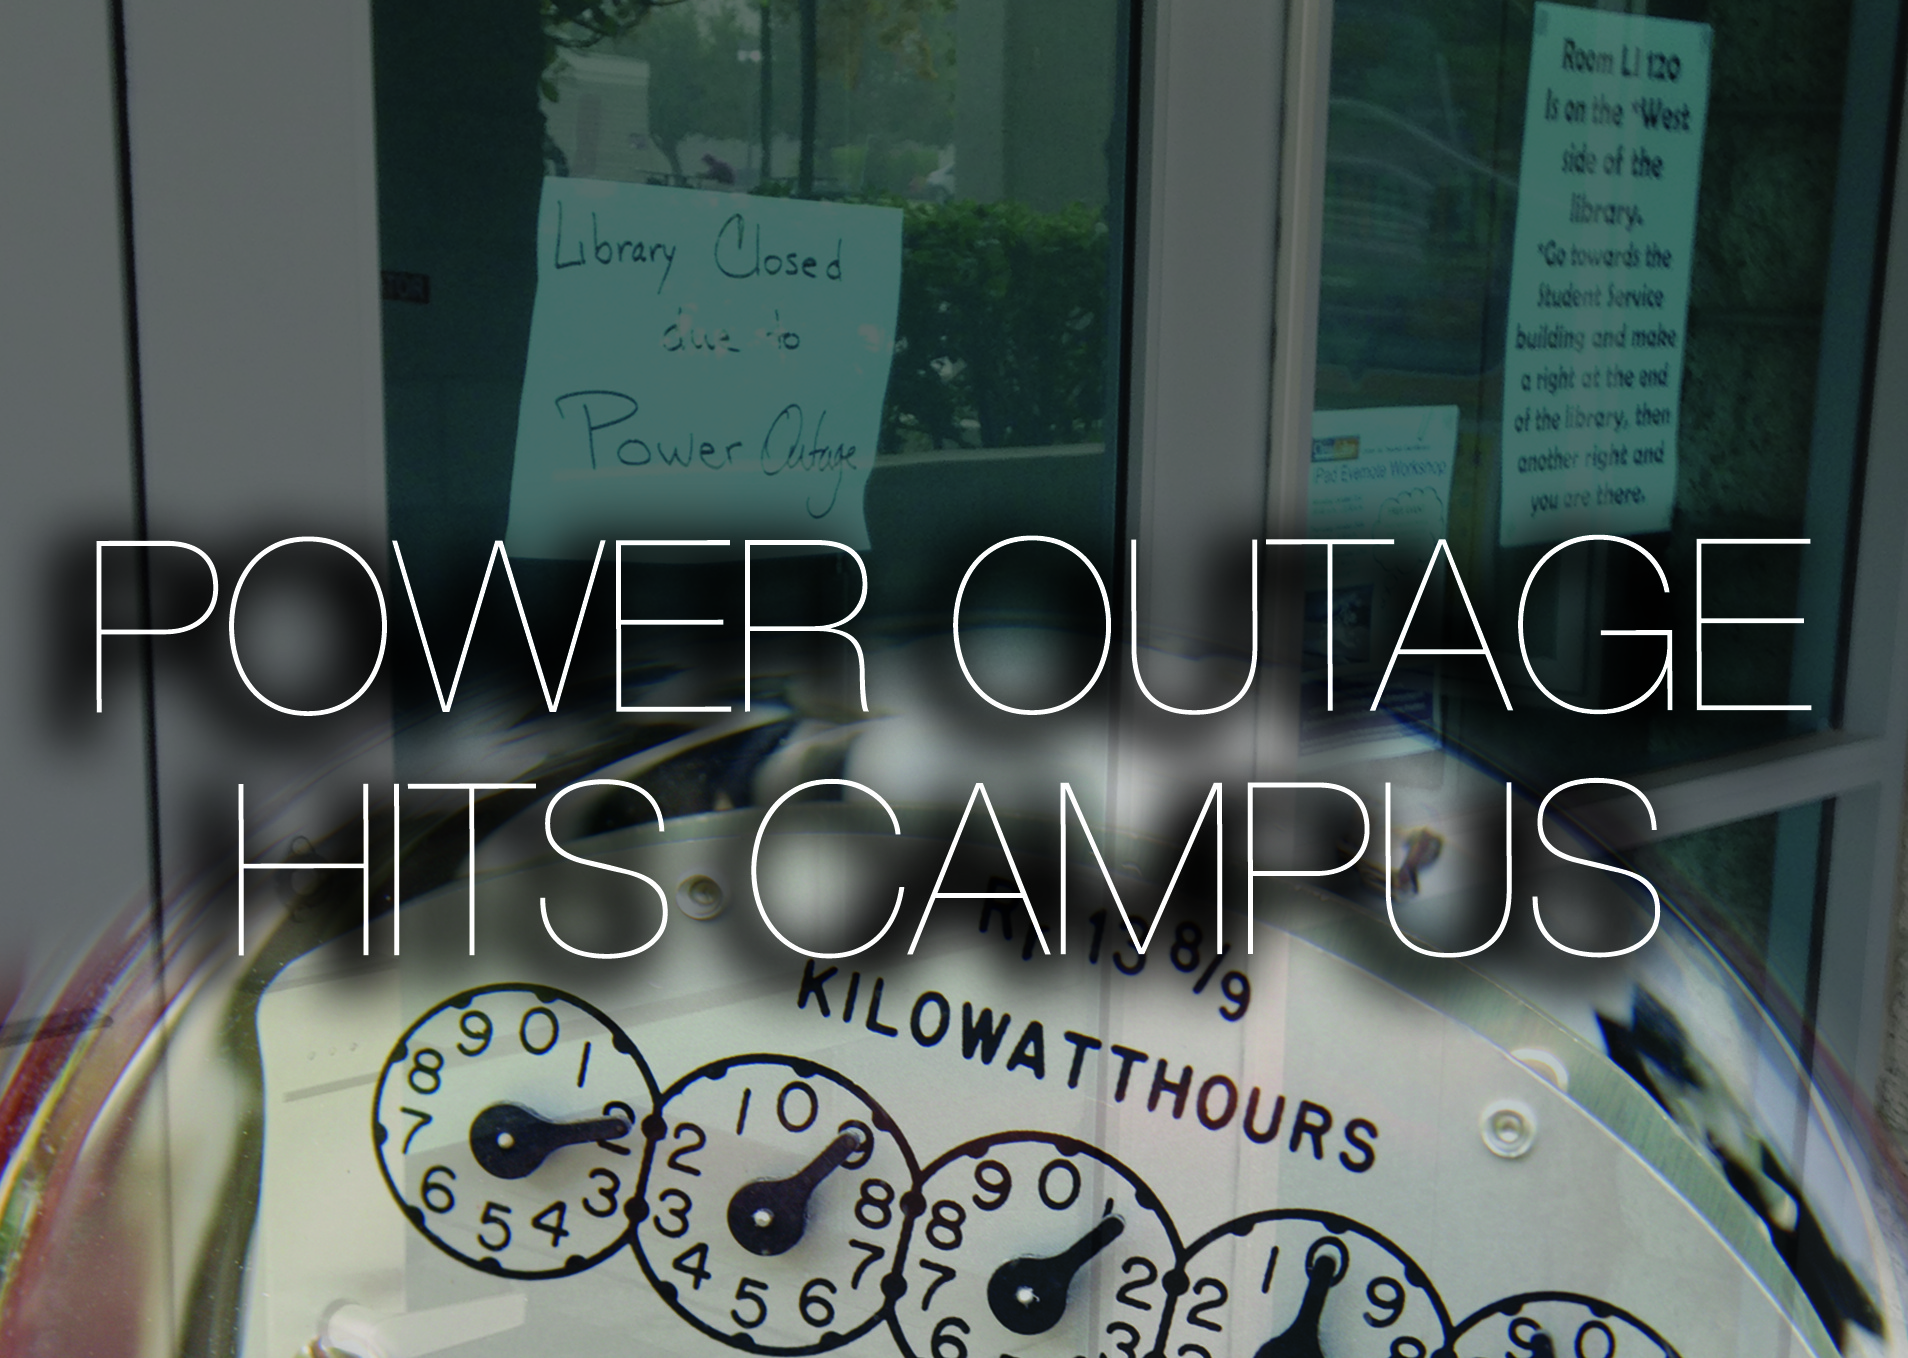 Campus wide power outage strikes